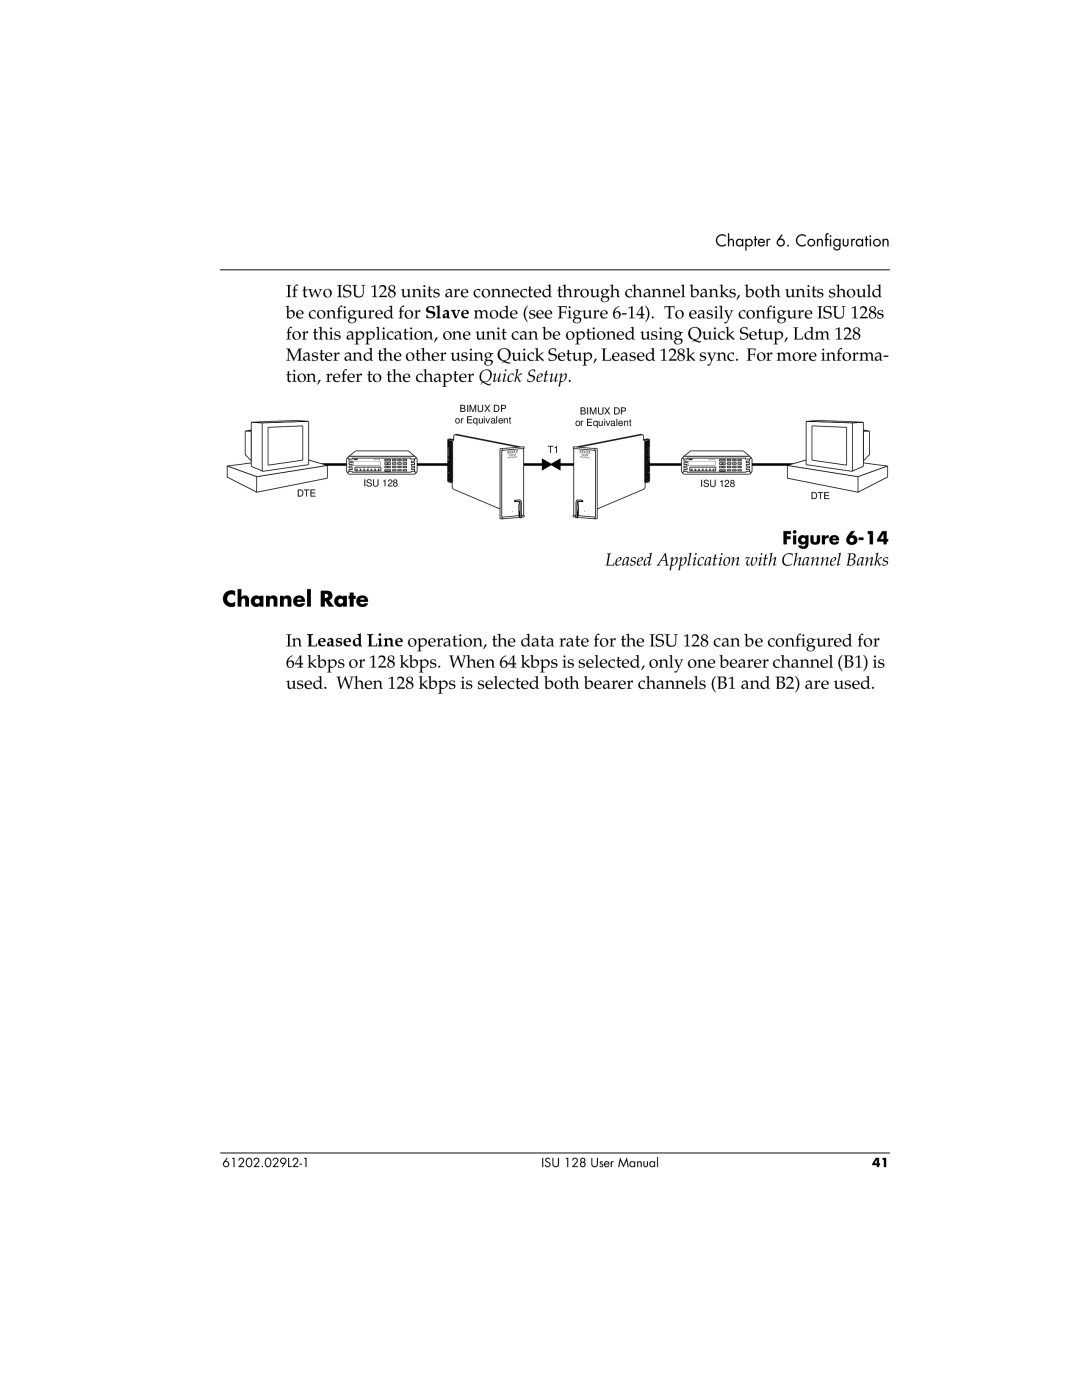 ADTRAN ISU 128 user manual Channel Rate, Leased Application with Channel Banks 